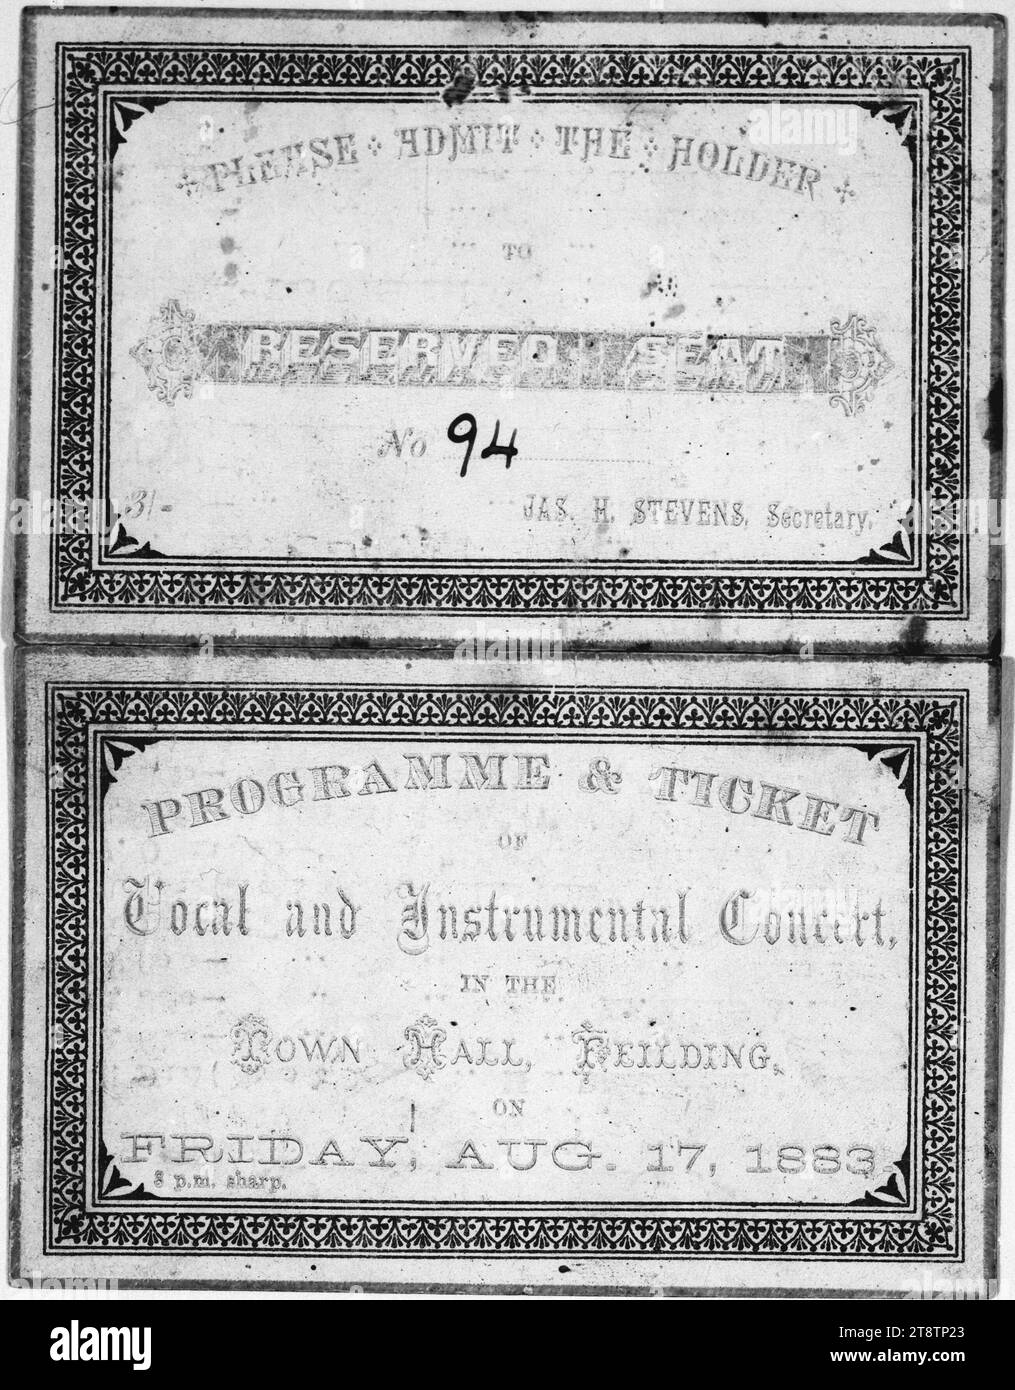 Town Hall Feilding: Local and Instrumental Concert, Friday Aug. 17, 1883. Programme and ticket. Cover, Programme and ticket number 94 for concert. Shows a decorative border on both front and back covers. Printed by Star Print, Feilding Stock Photo